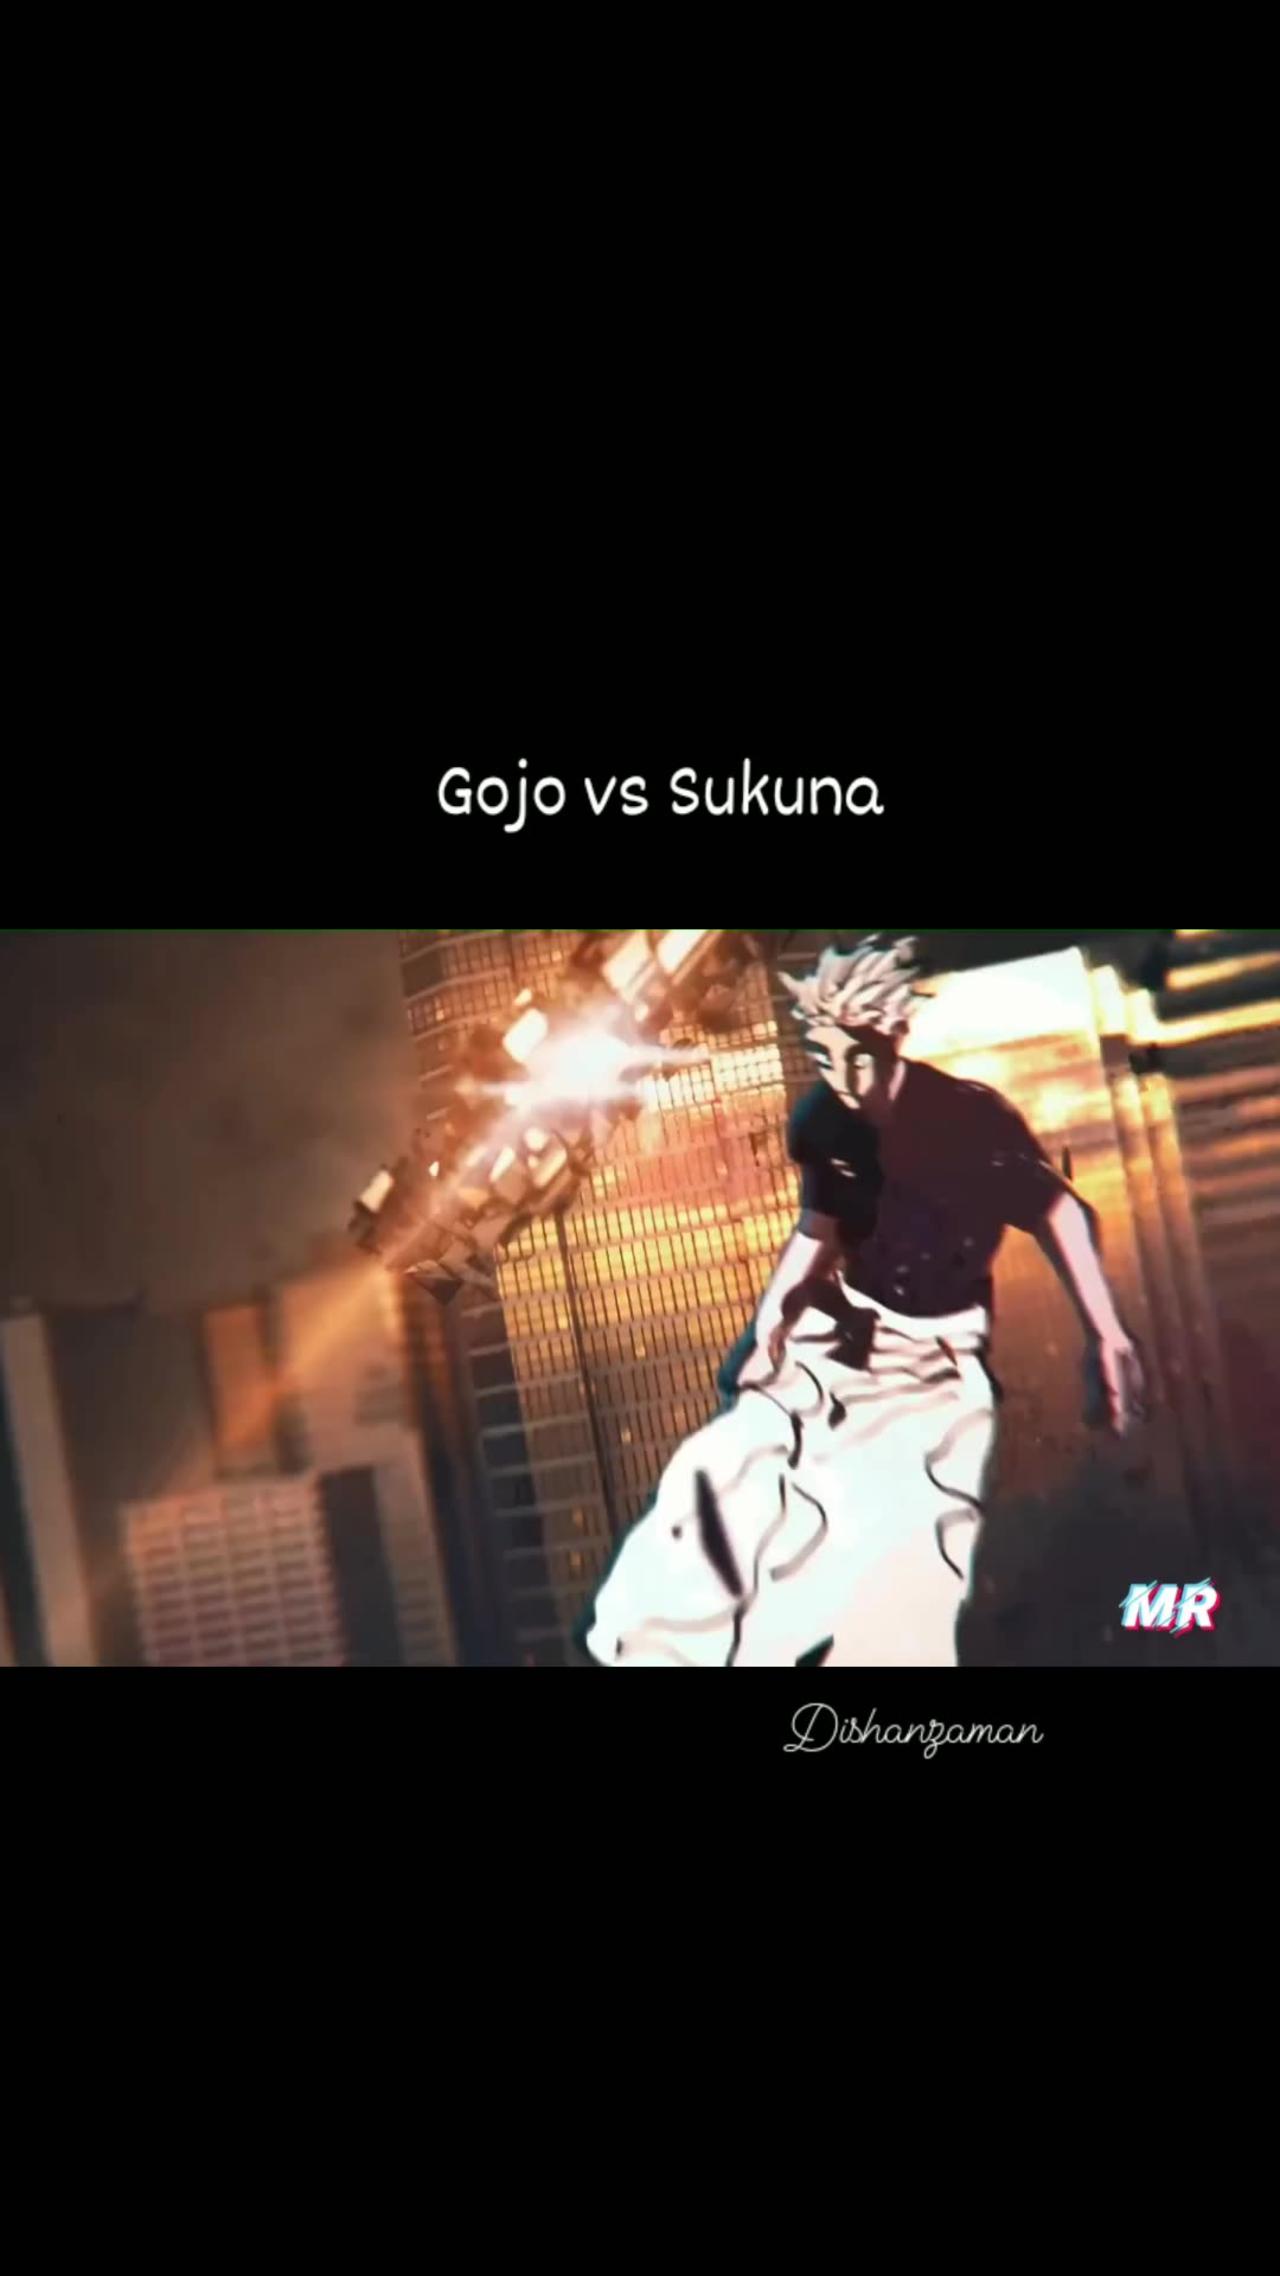 Gojo and sukuna fifgt OMG this is going to be badass fight of anime history